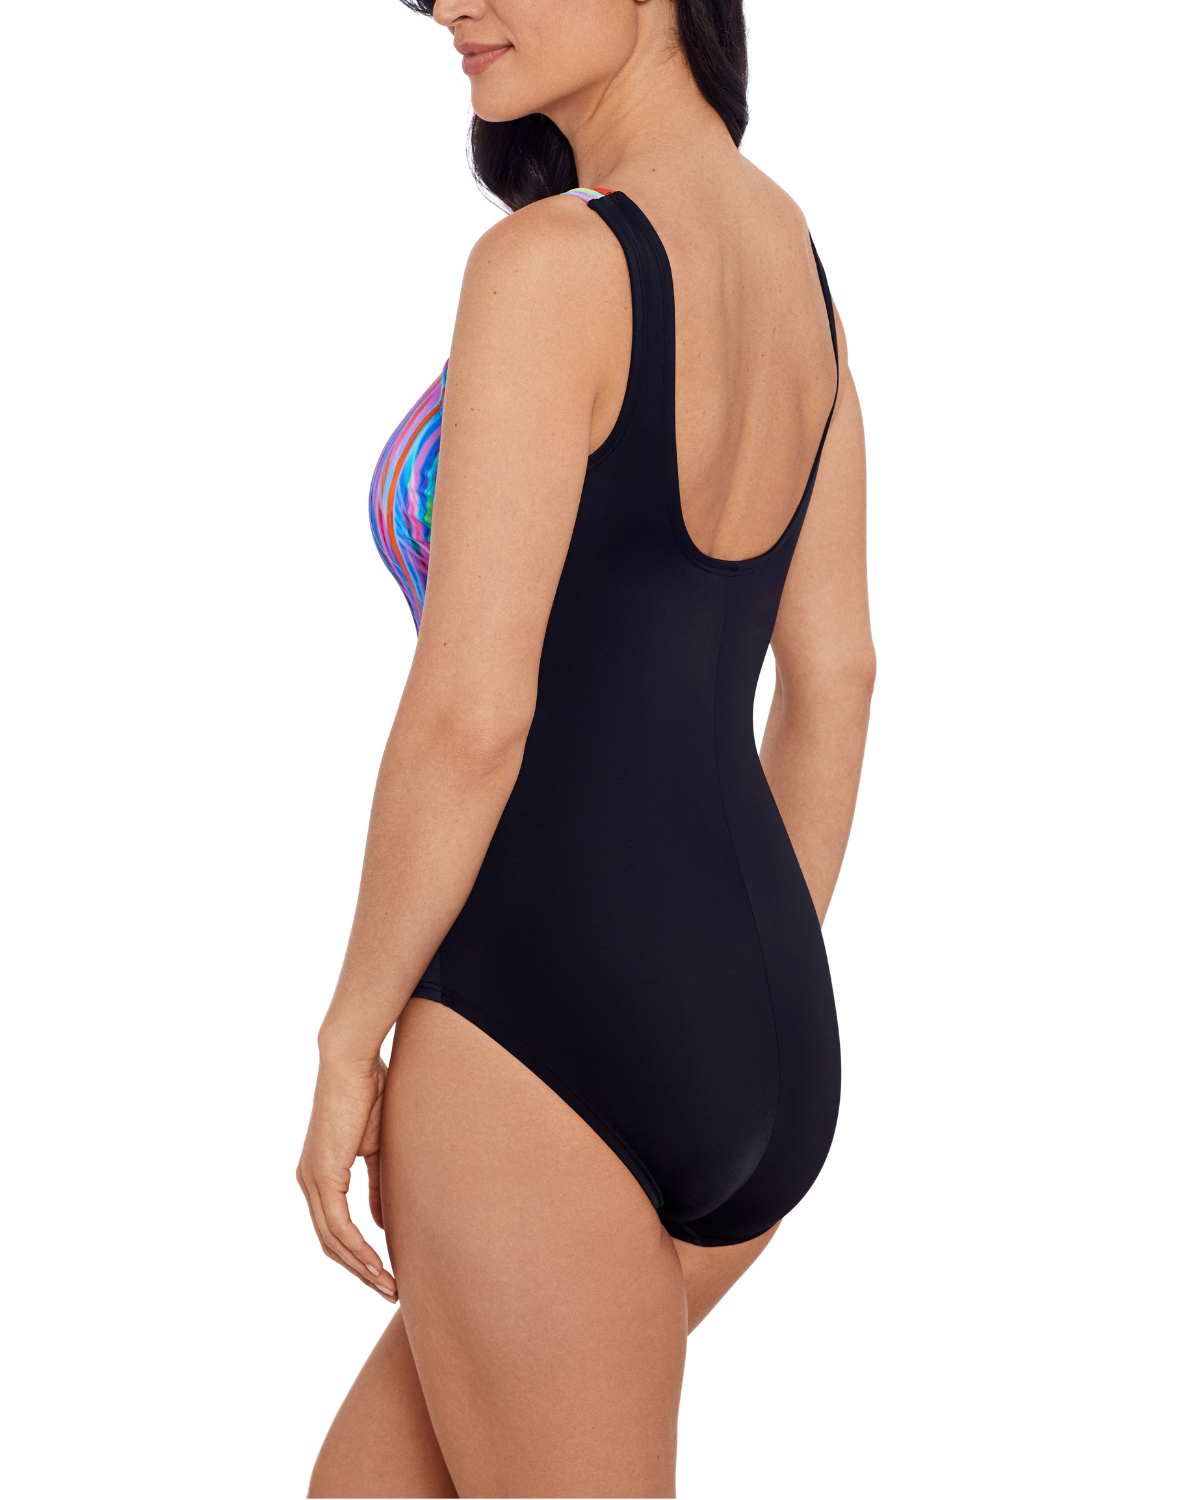 Model wearing a one piece scoop neck swimsuit in black with a purple, pink, blue and green crosshatch detailing the top front half. 